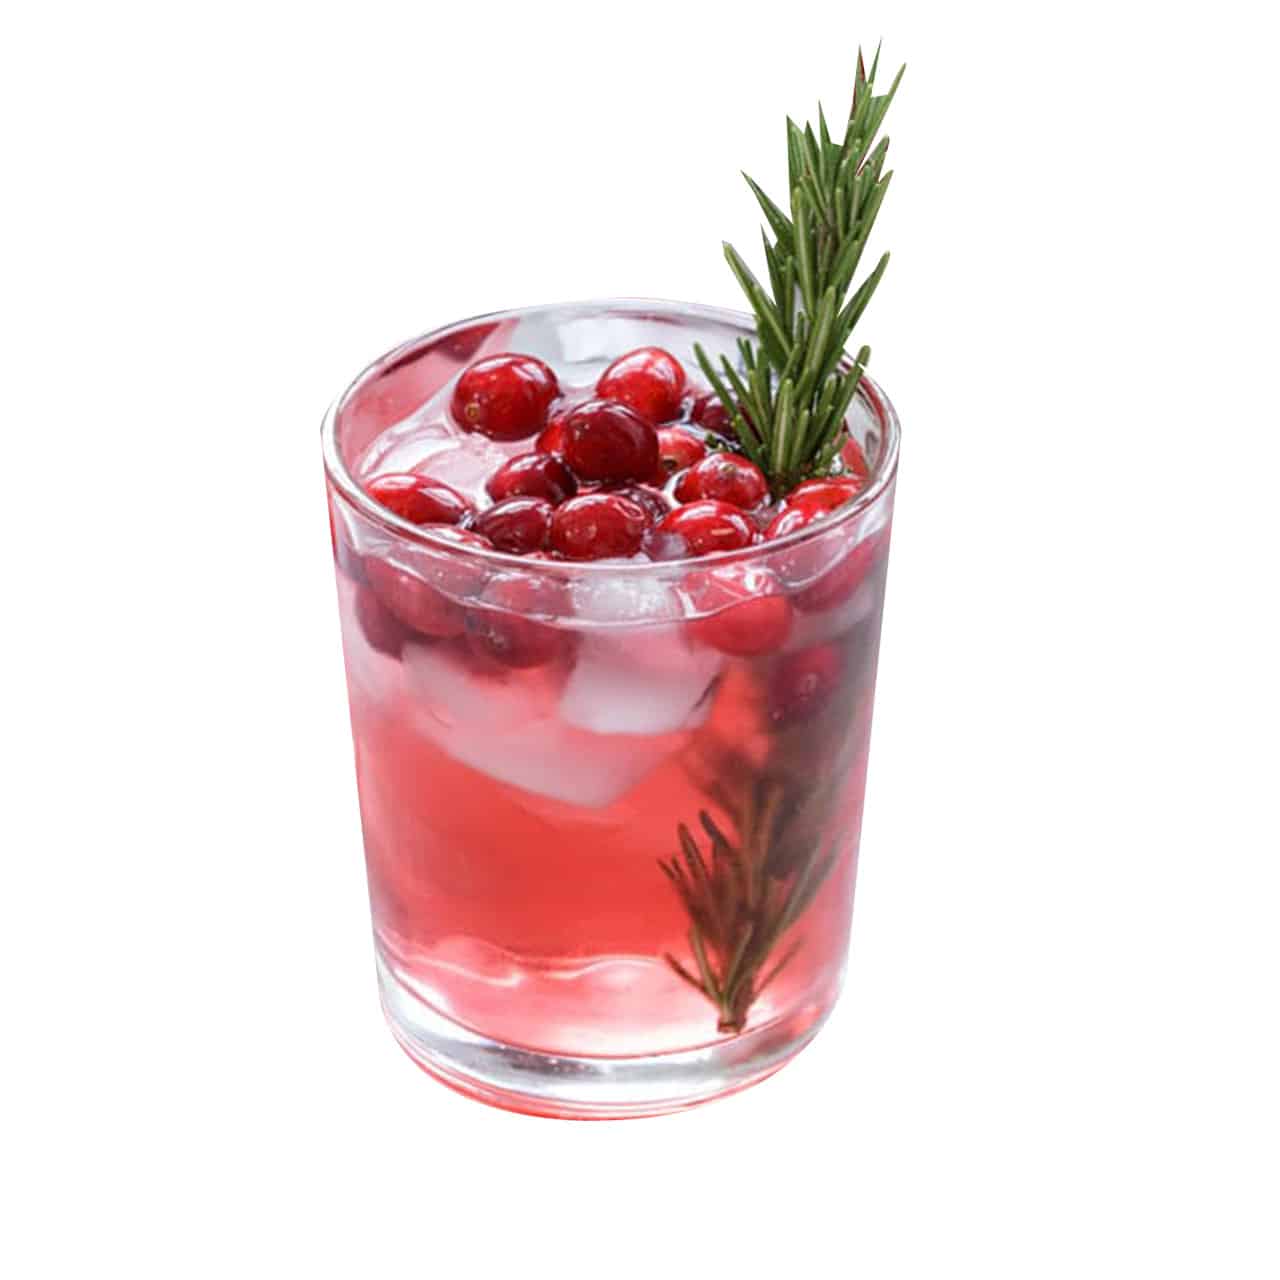 (Out of Season) Spiced Cranberry Gimlet ( - 1.5oz Gin, .75oz Cranberry Spiced Syrup, .75oz Lime Juice